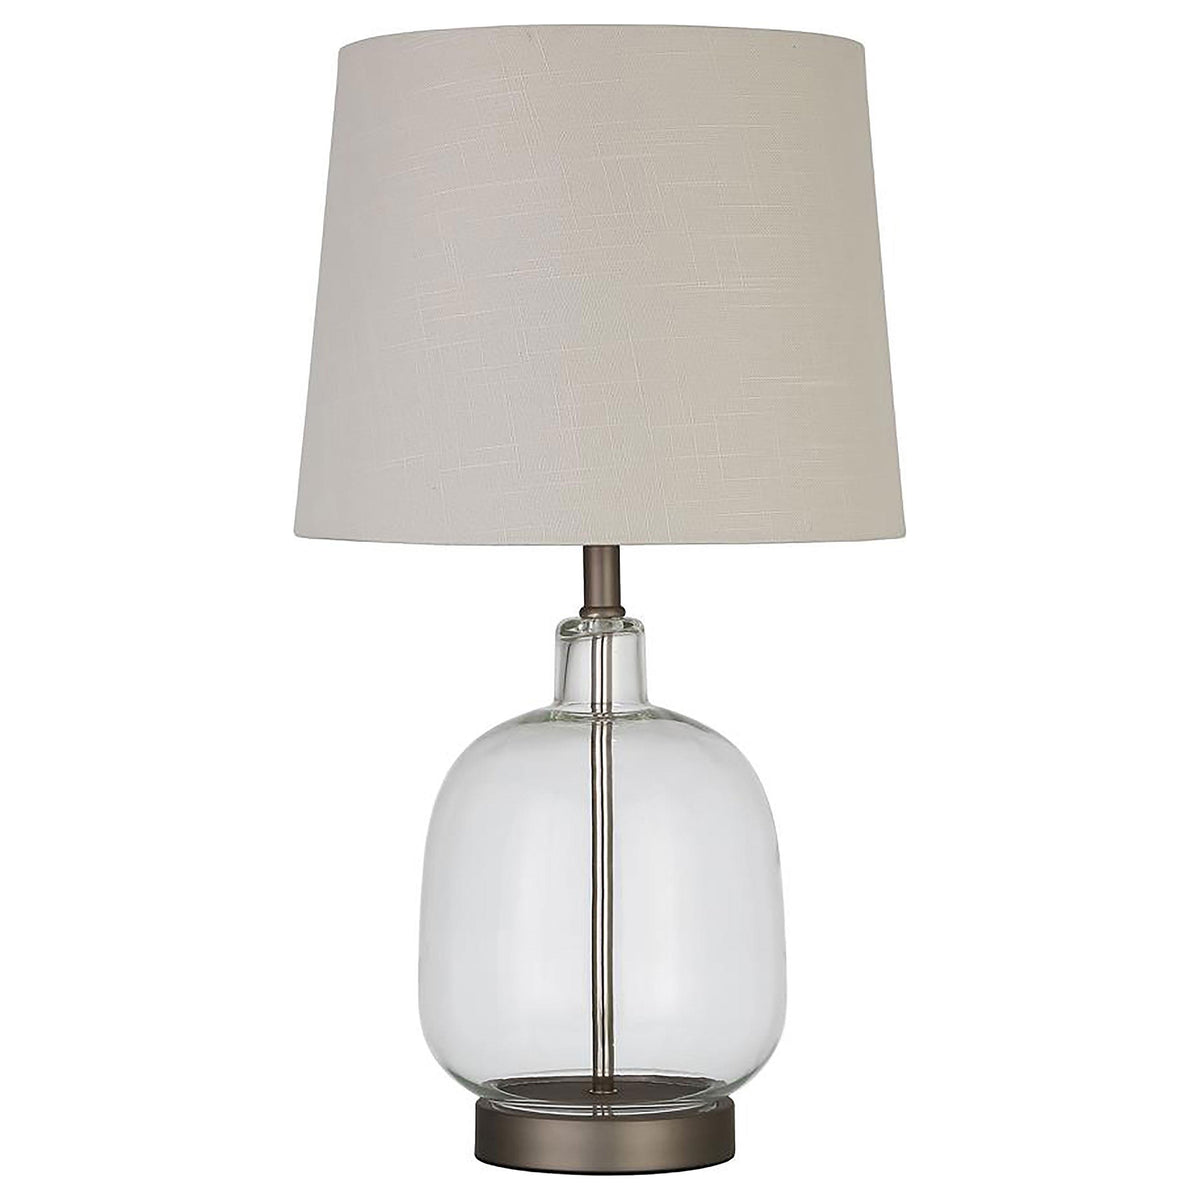 Costner Empire Table Lamp Beige and Clear  Half Price Furniture